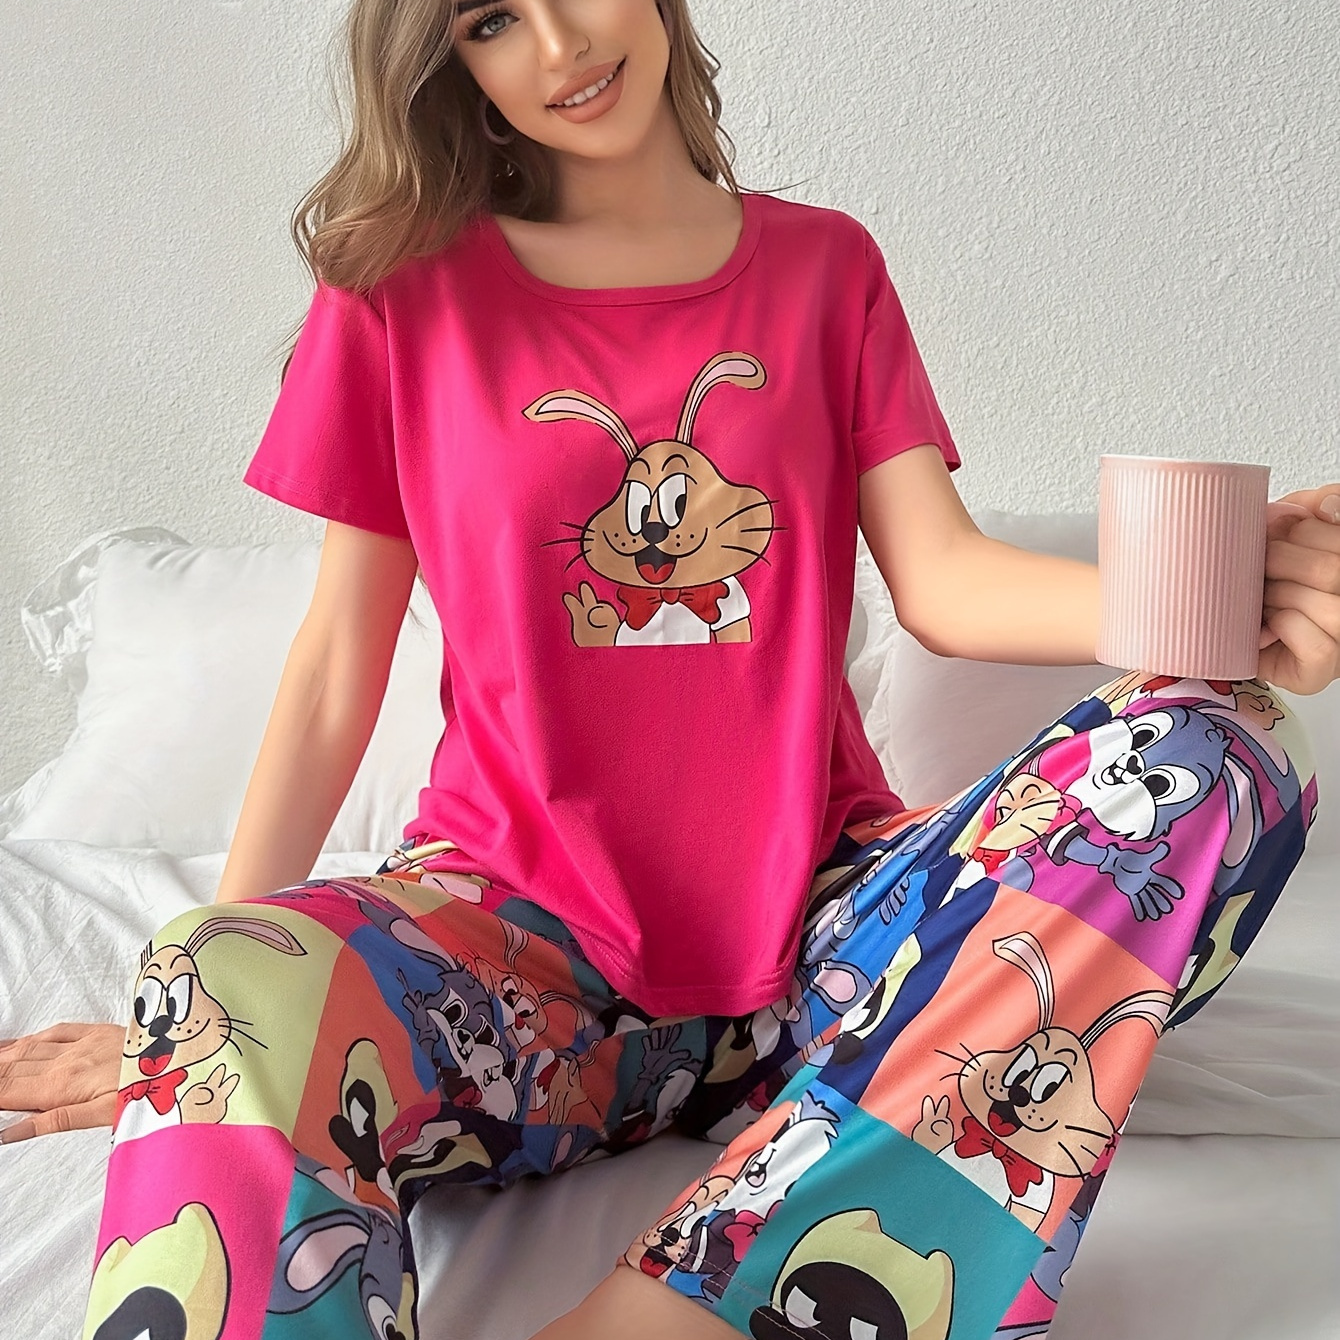 

Women's Cute Cartoon Print Pajama Set, Short Sleeve Round Neck Top & Pants, Comfortable Relaxed Fit